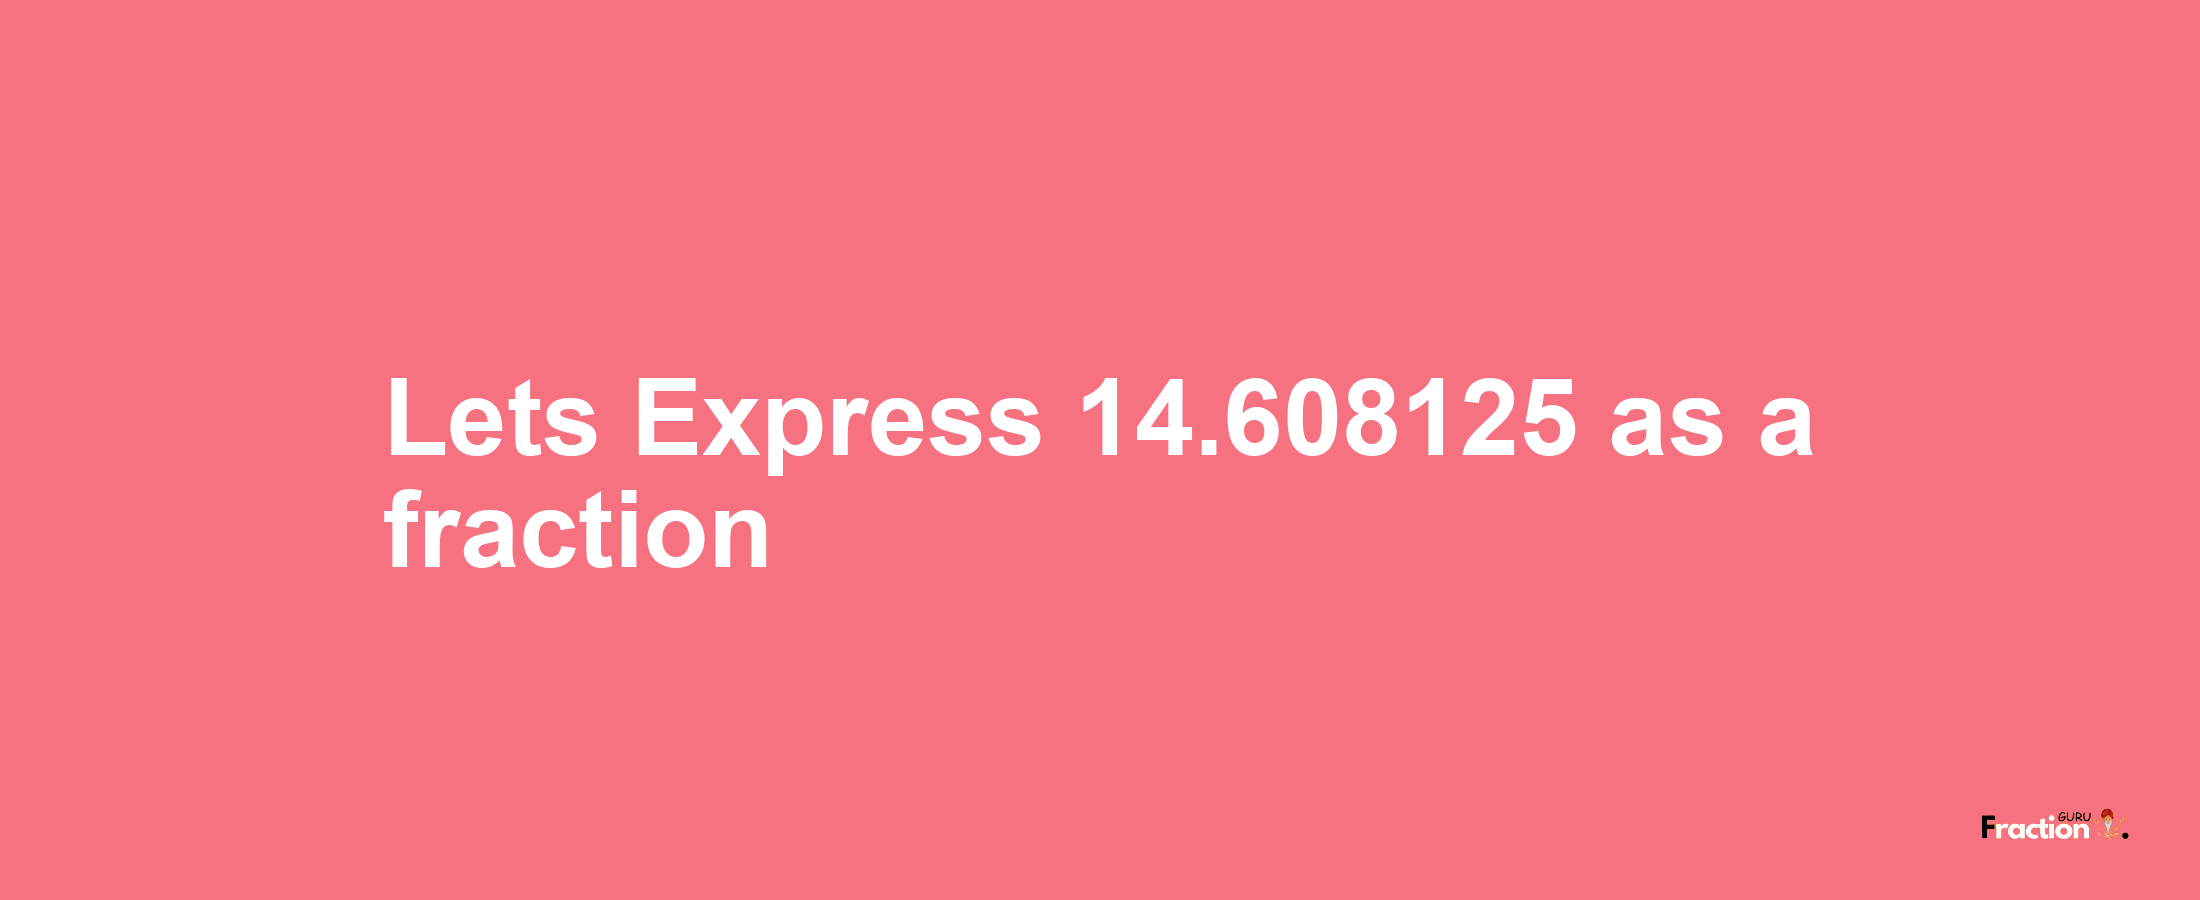 Lets Express 14.608125 as afraction